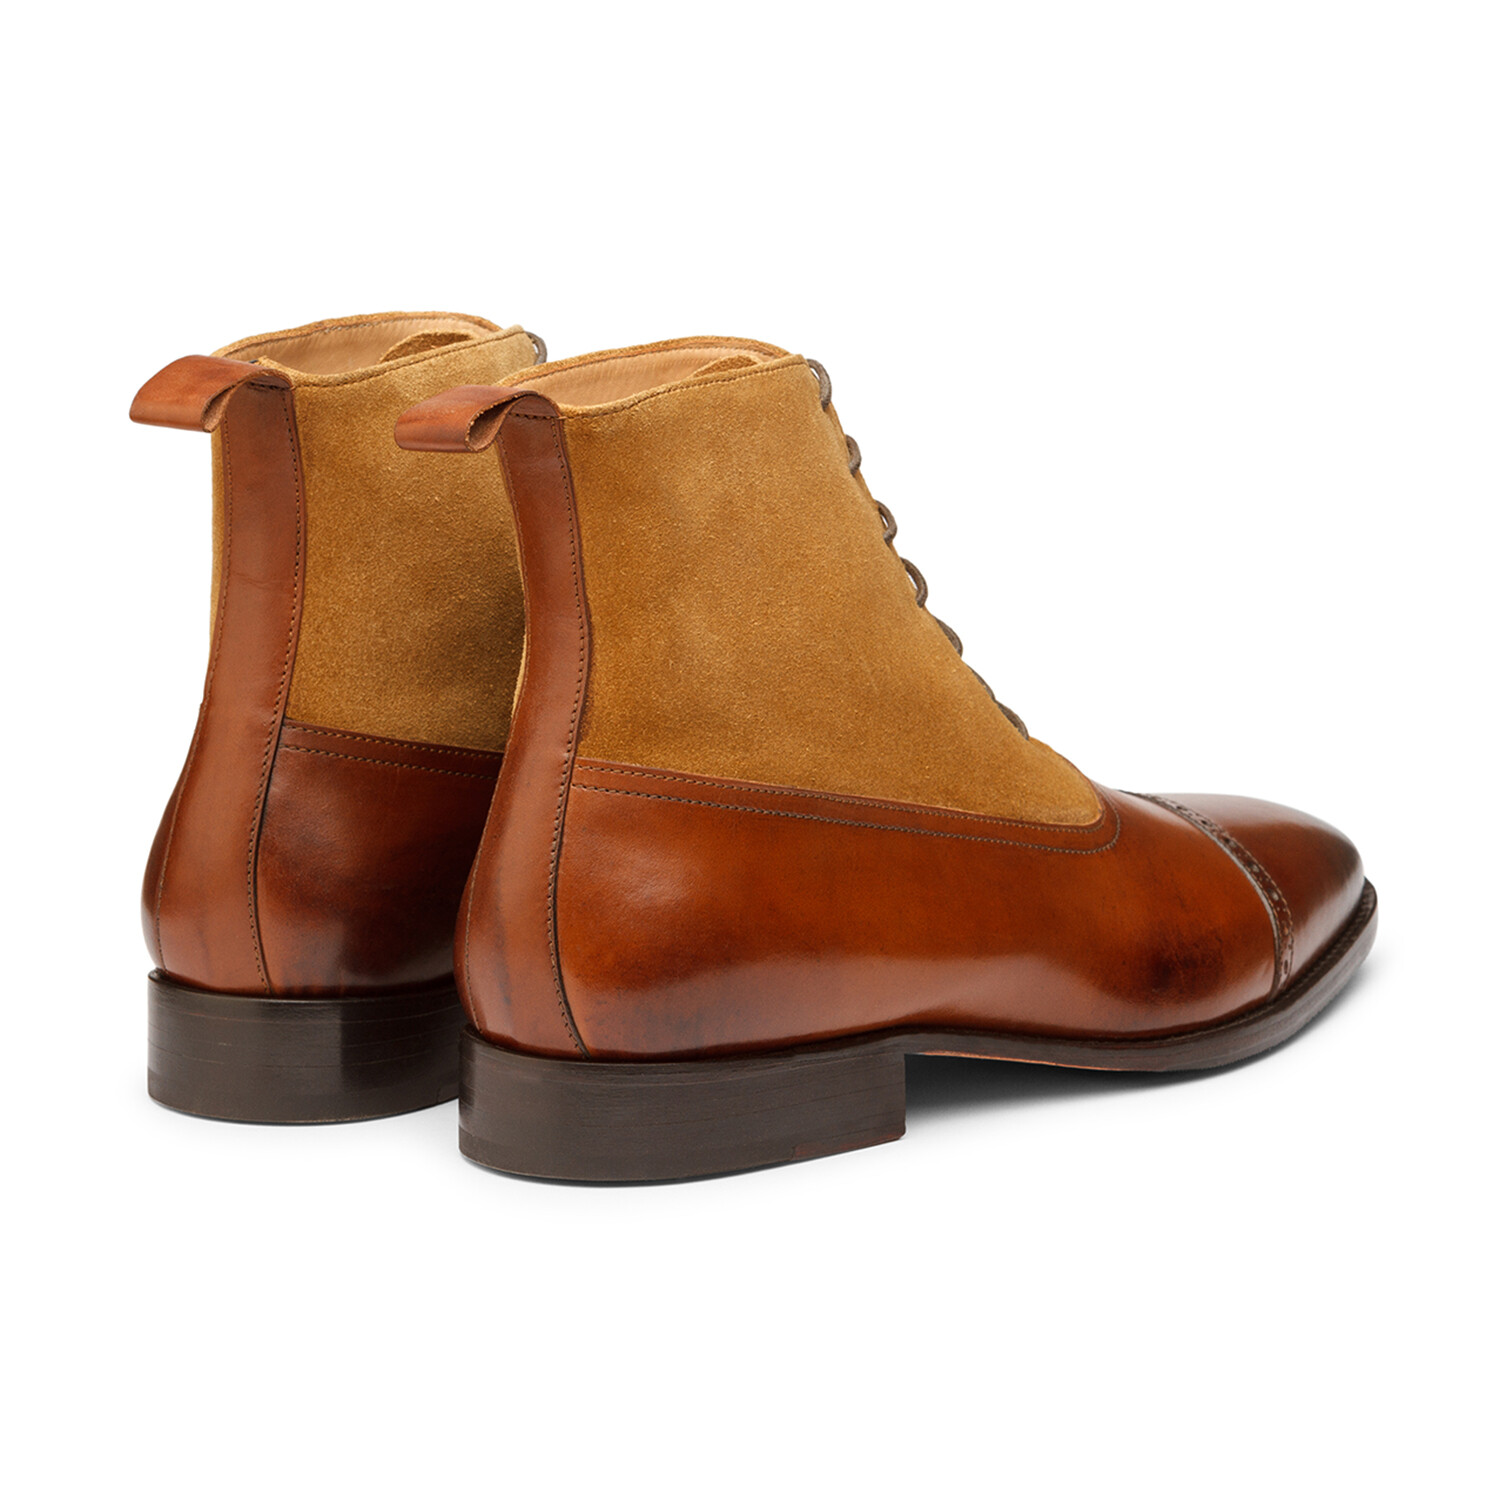 Two Tone Balmoral Leather Boot // Brown + Camel Suede (US: 7) - 3DM ...